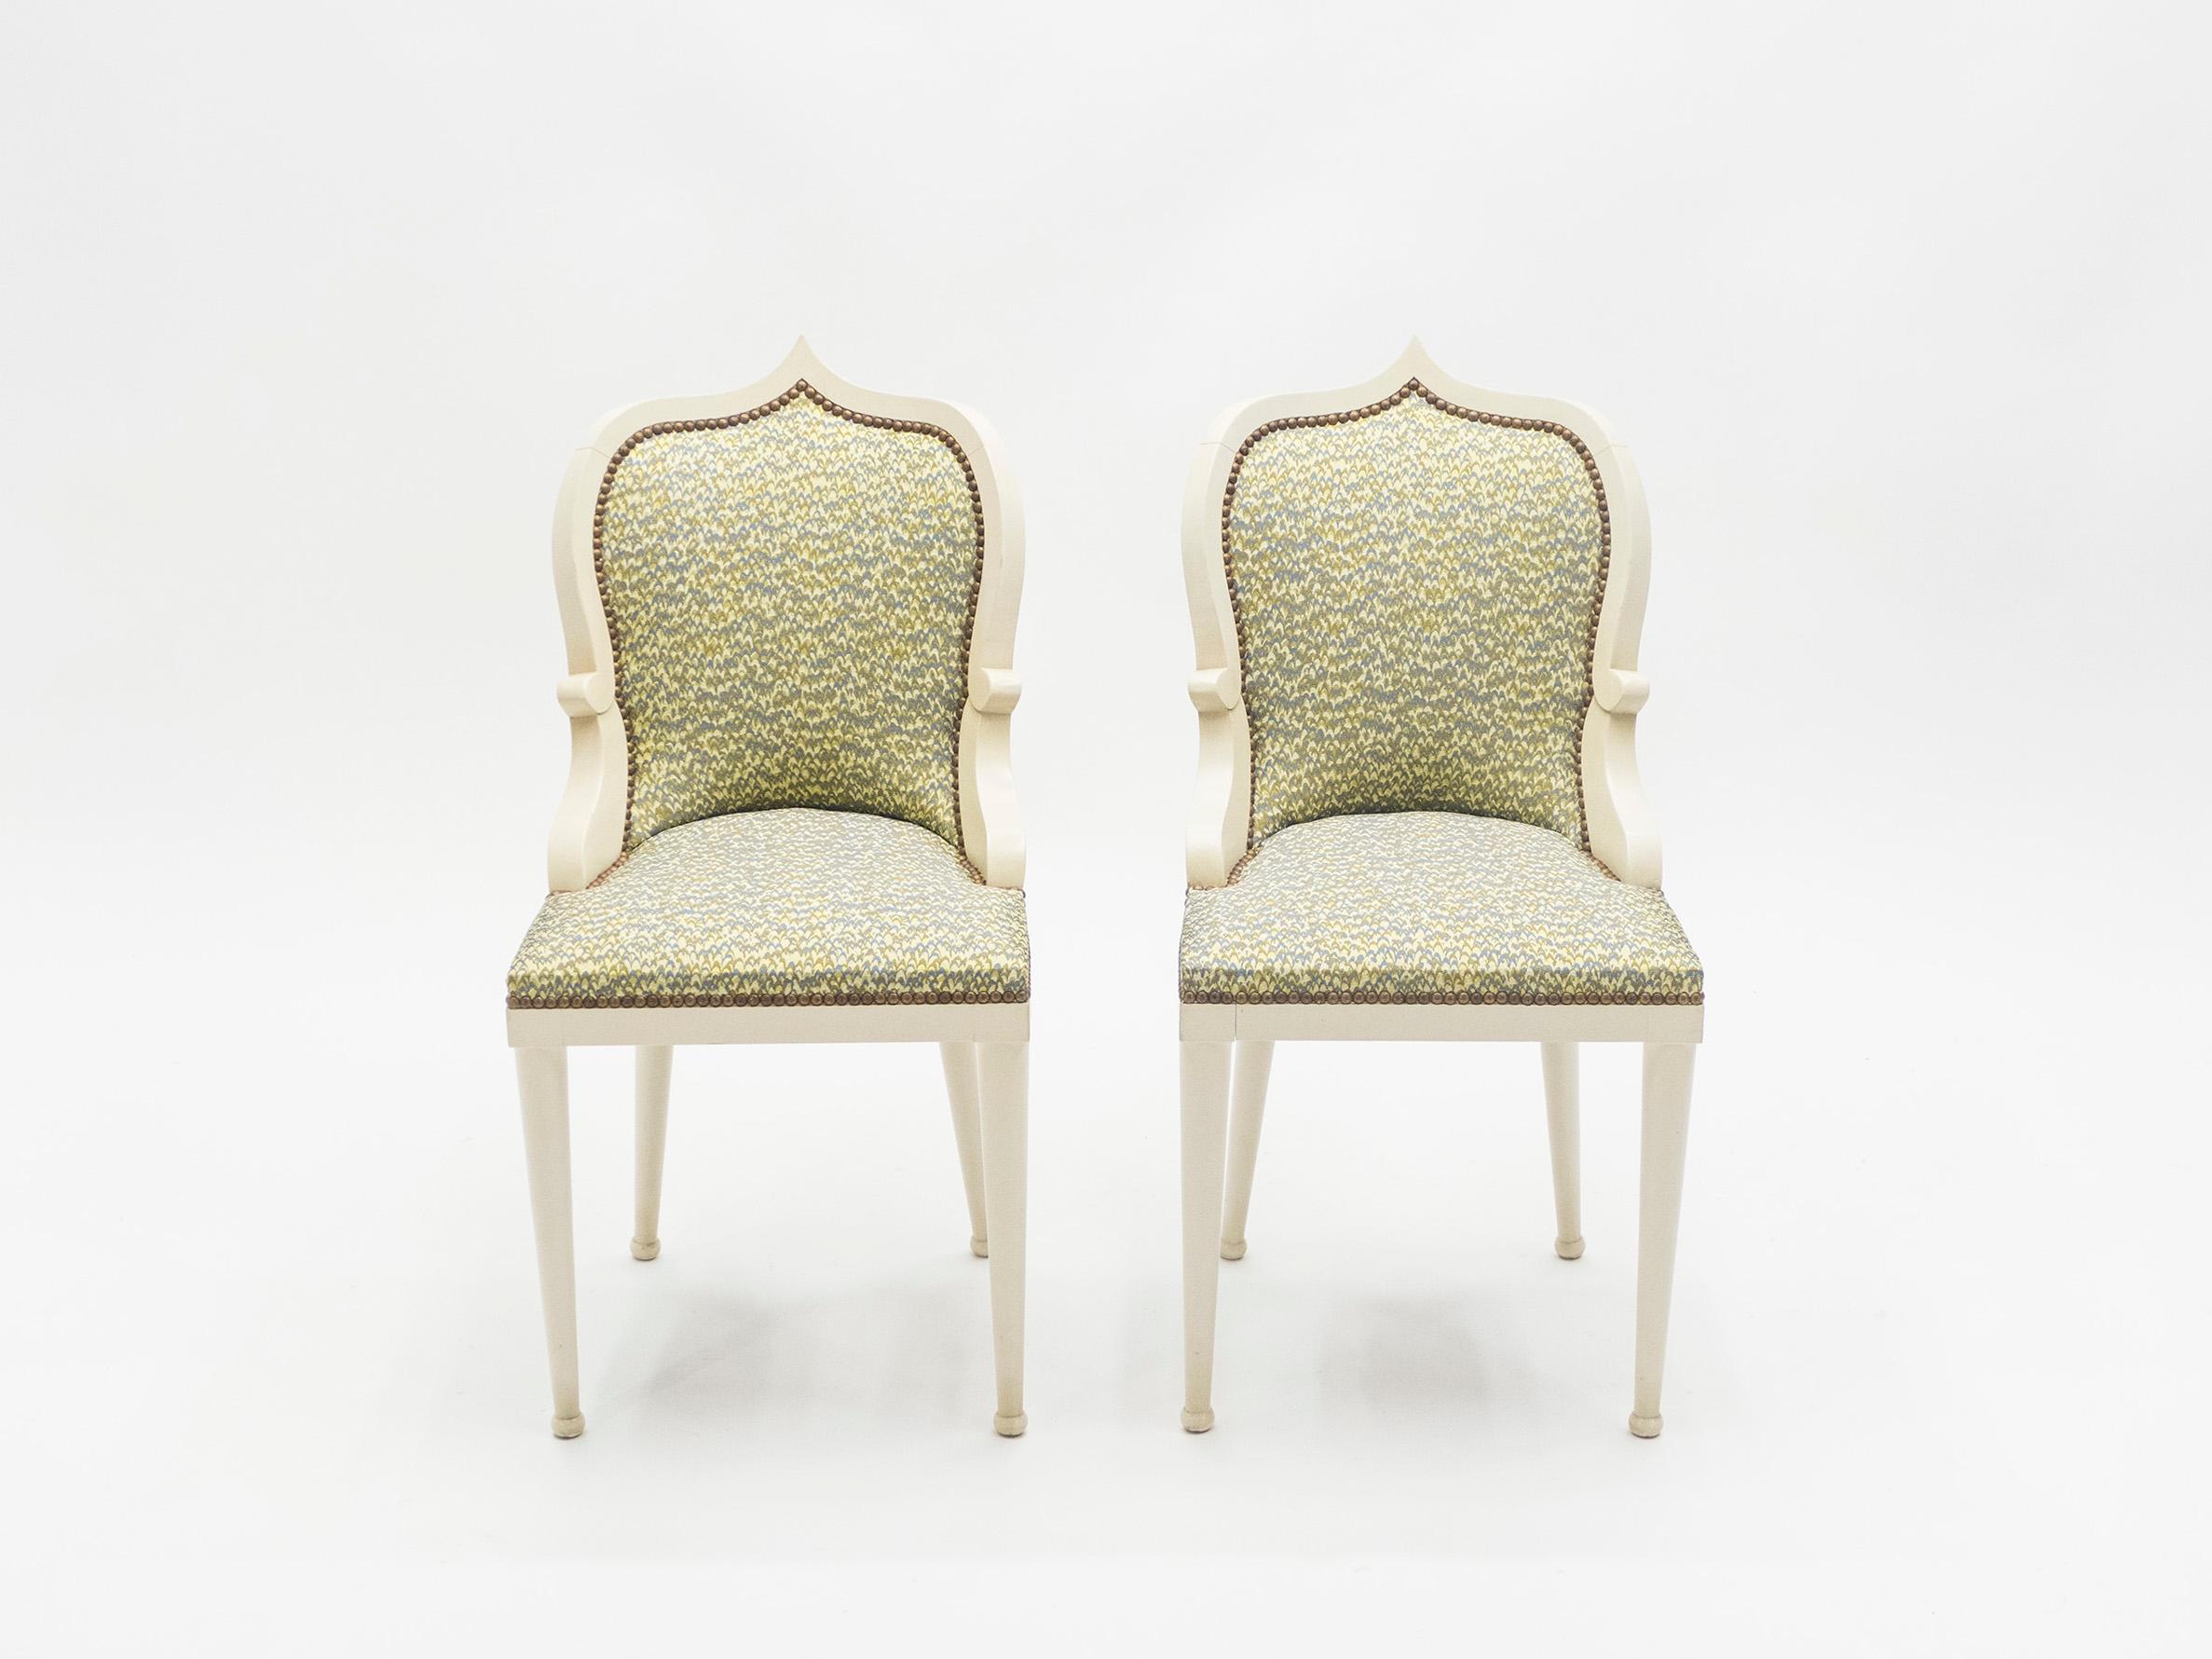 This is an incredibly rare set of 10 dining chairs by Elizabeth Garouste & Mattia Bonetti, model Palace, made in white cream painted solid oak. Garouste & Bonetti began their collaboration and gained global recognition for their interior design of